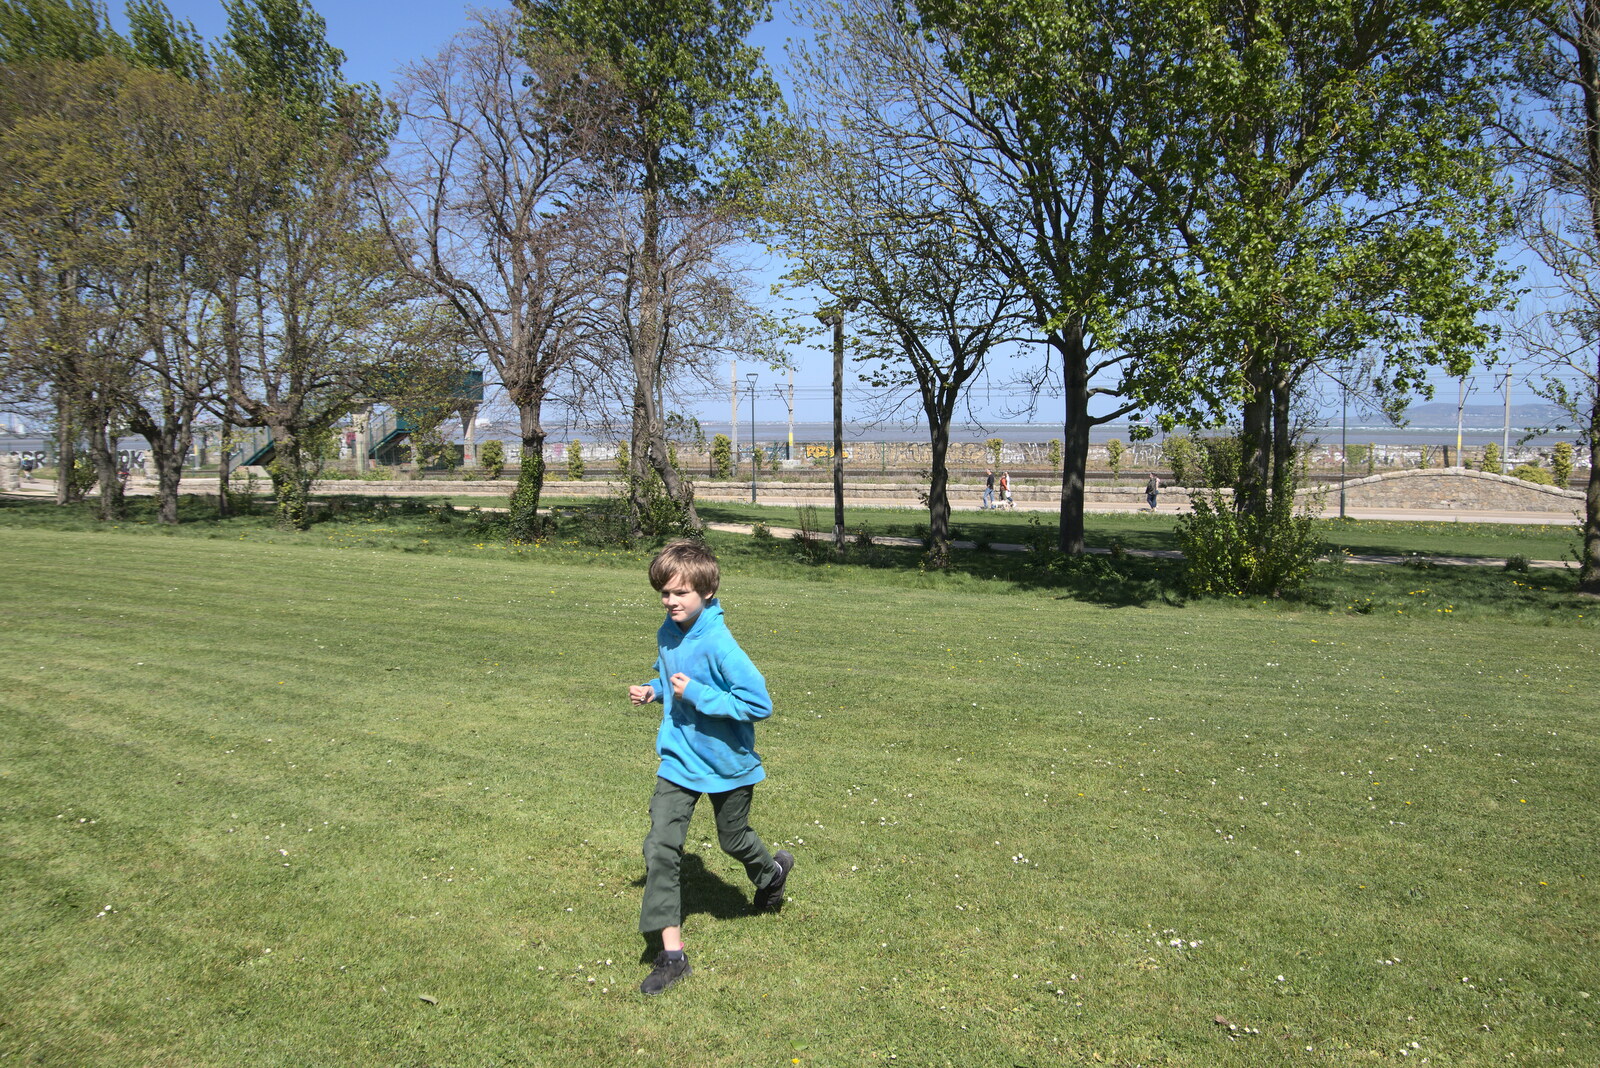 Blackrock North and South, Louth and County Dublin, Ireland - 23rd April 2022: Harry runs around